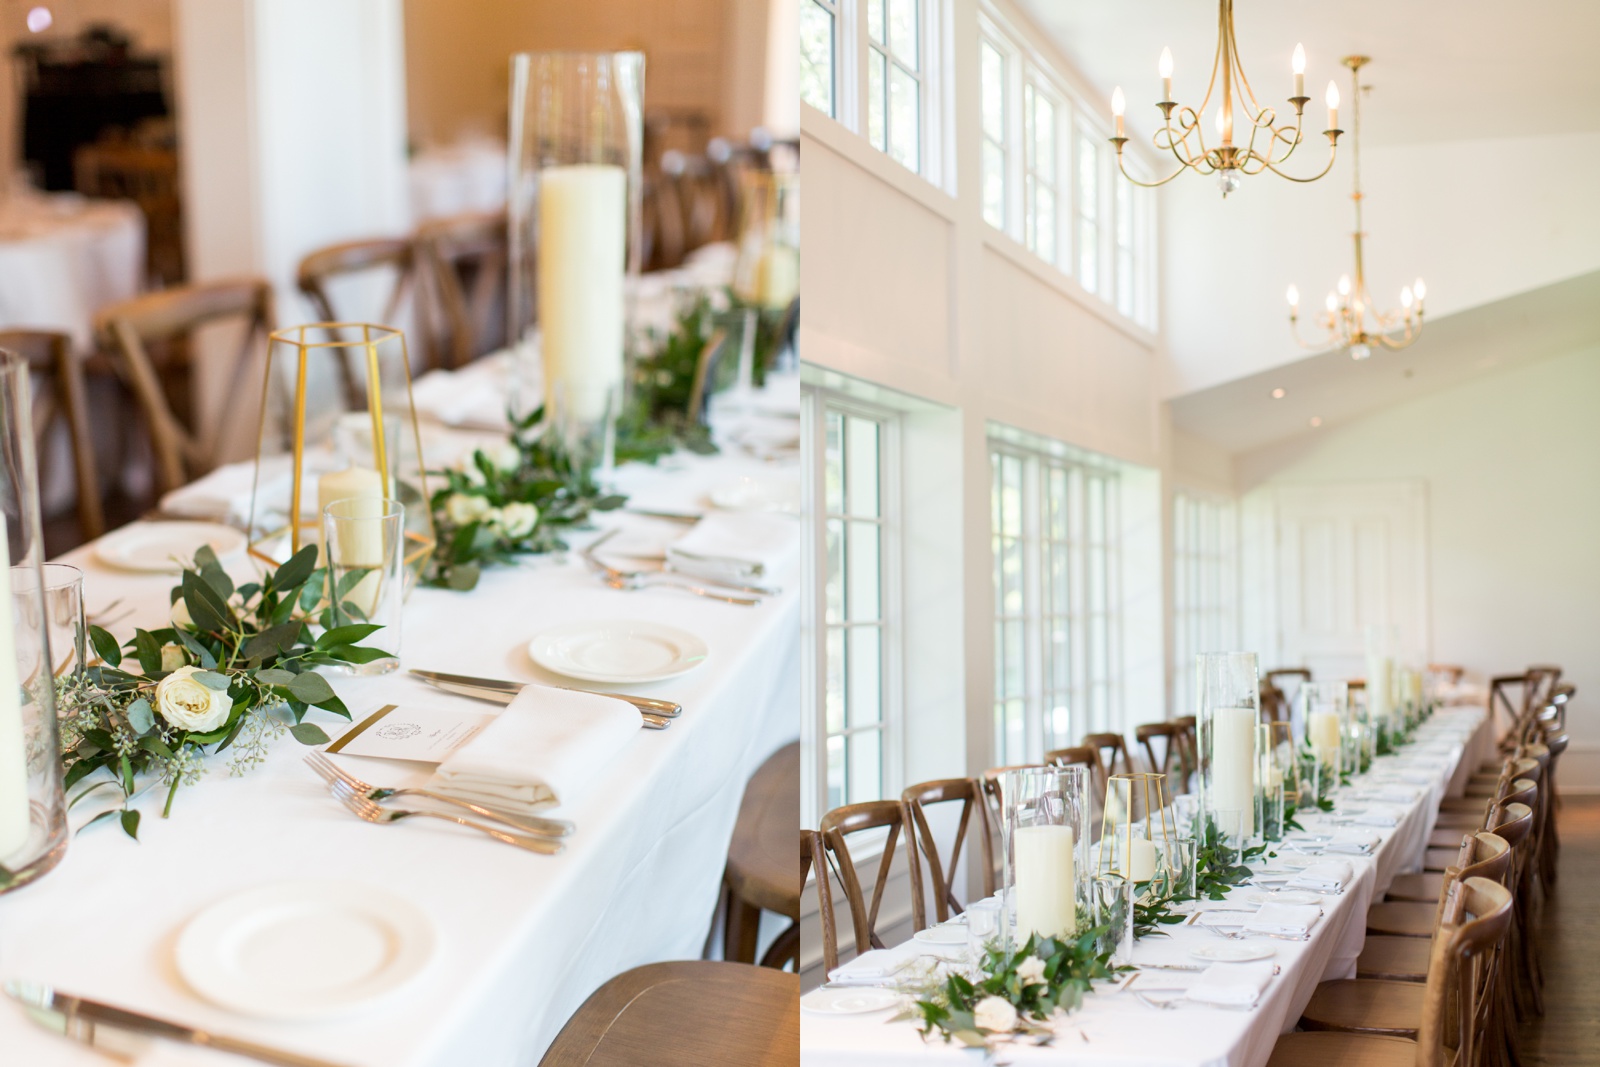 Film Reception details at an austin wedding. White, greenery, and cream wedding colors.